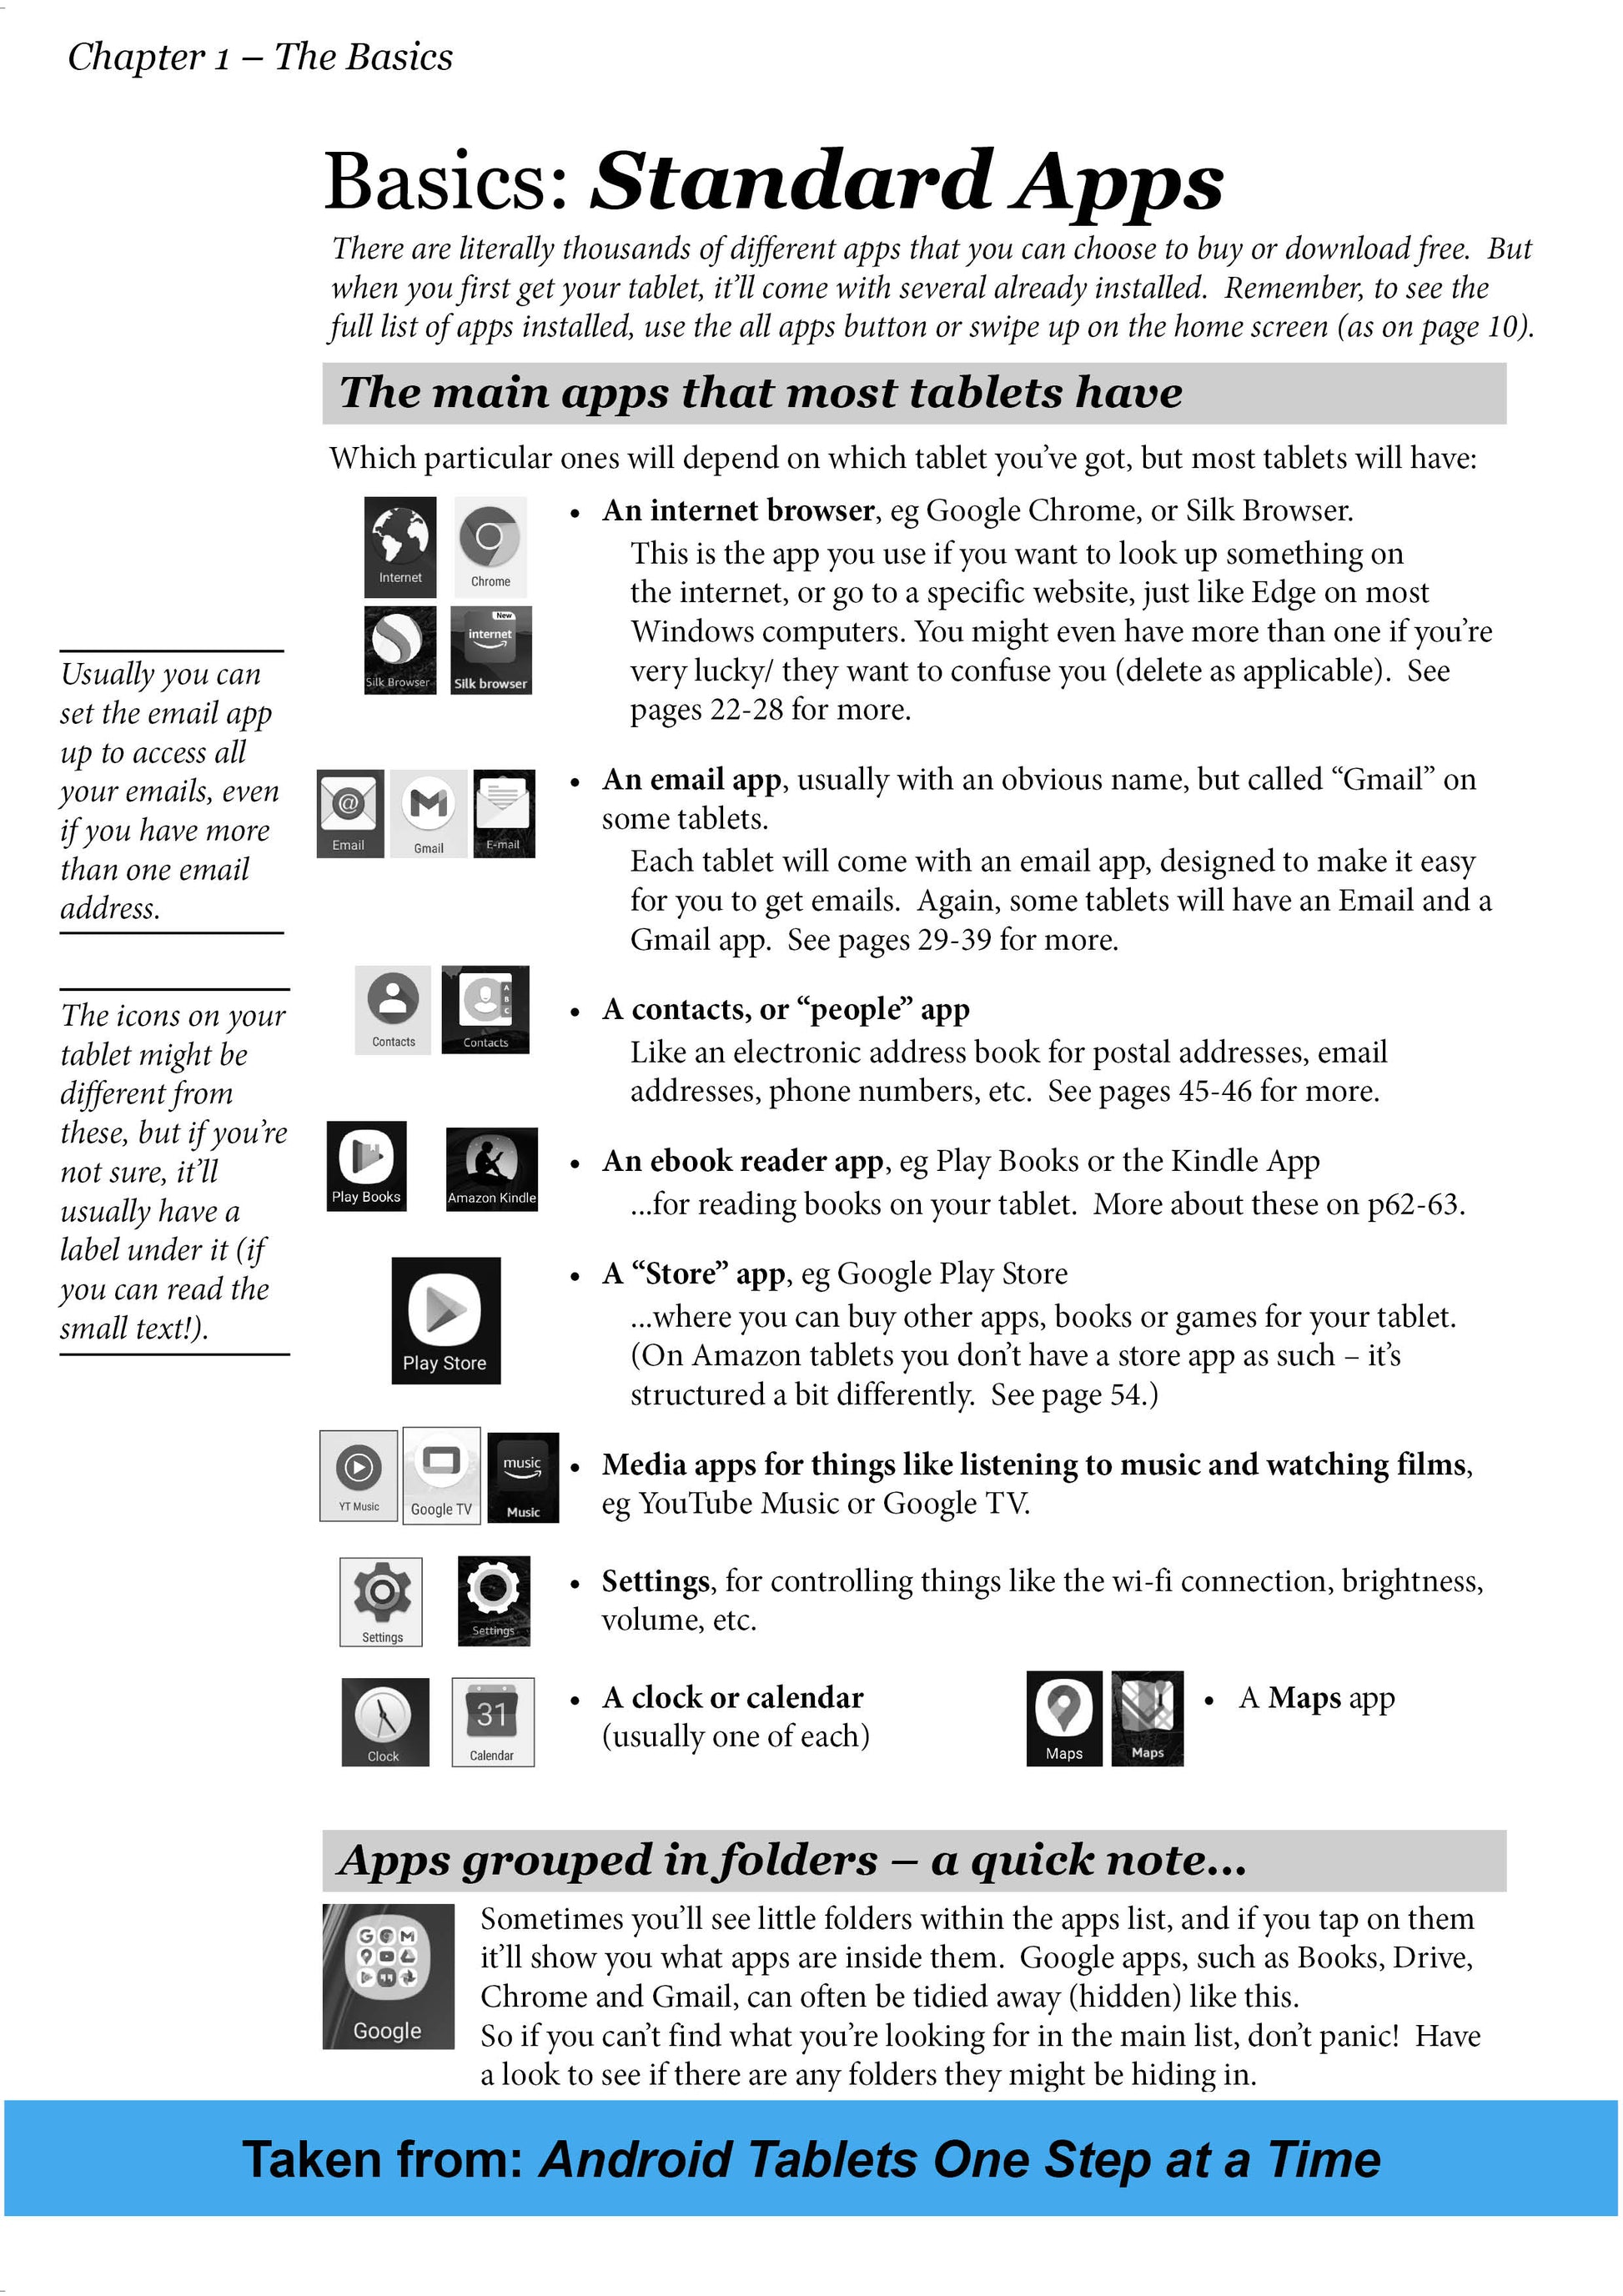 Android Tablets One Step at a Time sample page